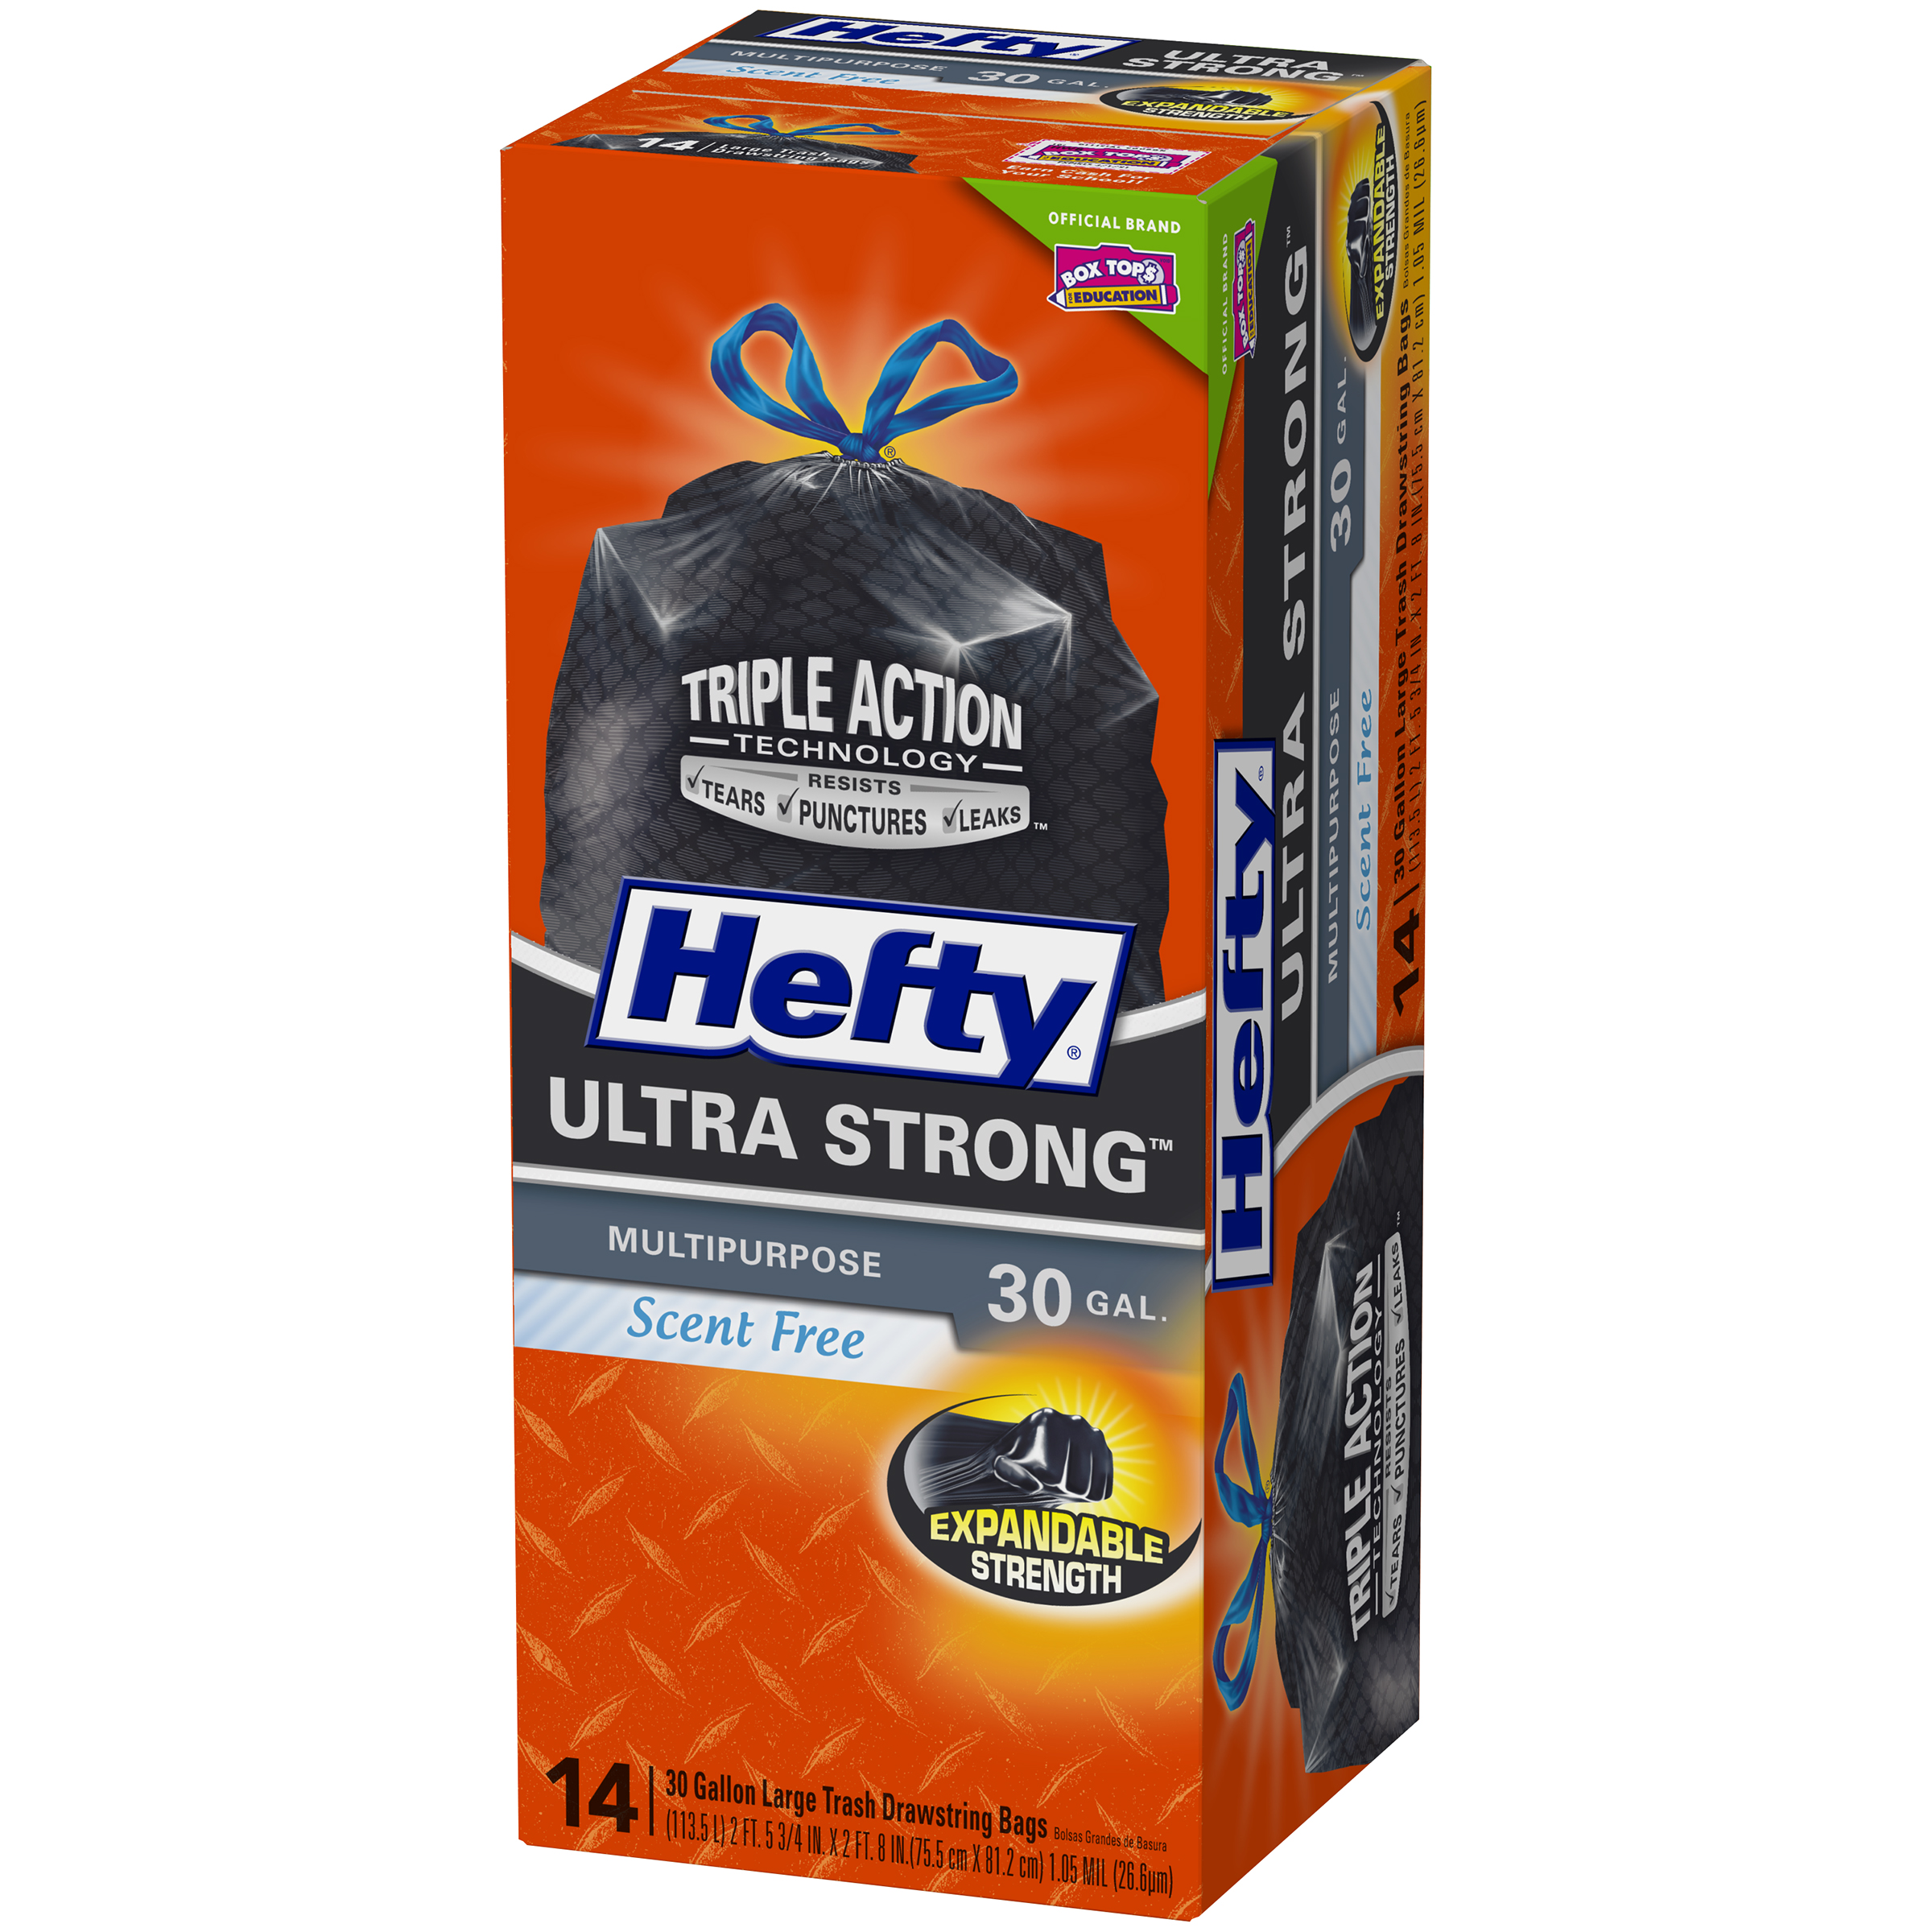 Hefty Recycling 30 Gal. Blue Large Trash Drawstring Bags 36 Ct Scent Free  Box, Large